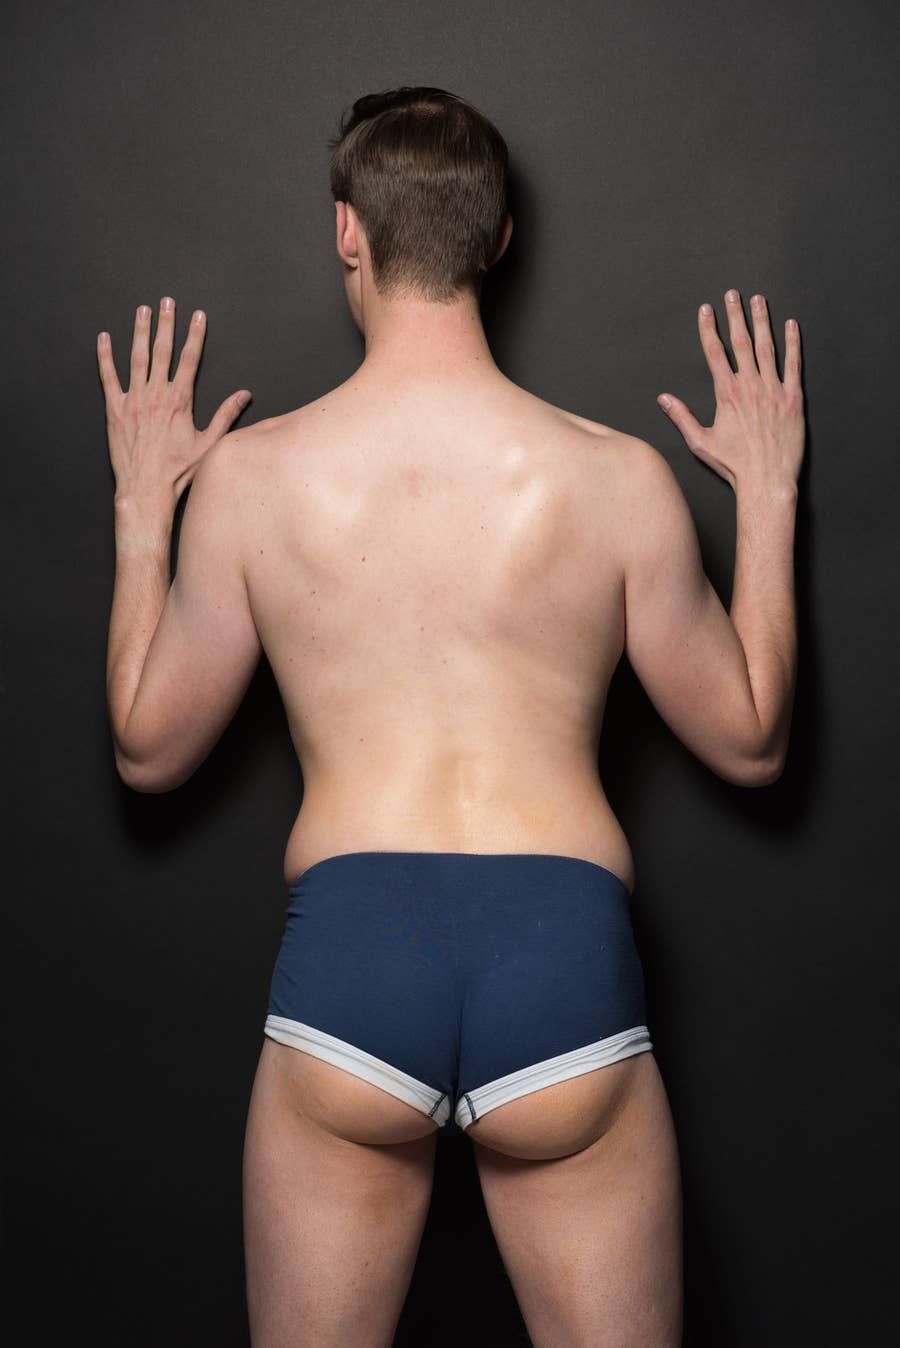 Men Get Photoshopped With Their Ideal Body Types Buzzfeed Video